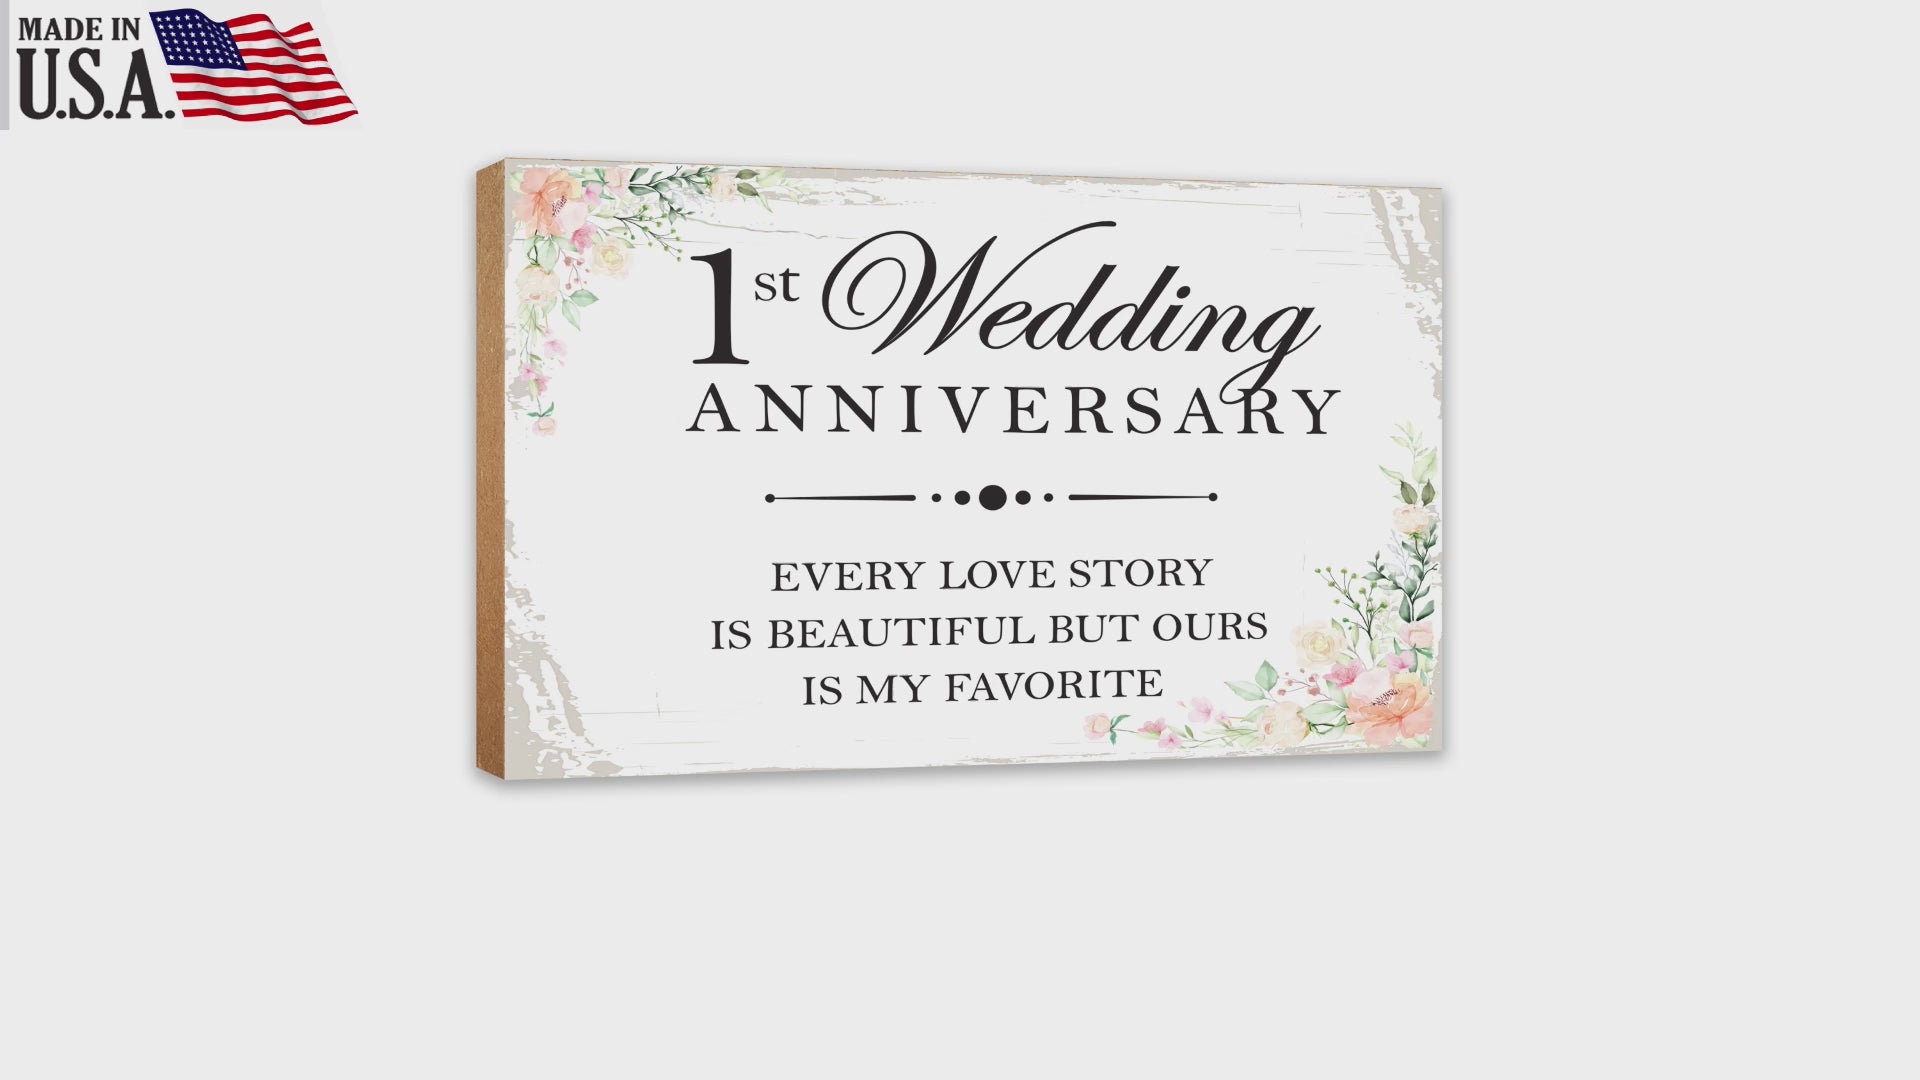 1st Wedding Anniversary Unique Shelf Decor and Tabletop Signs Gift for Couples - Every Love Story